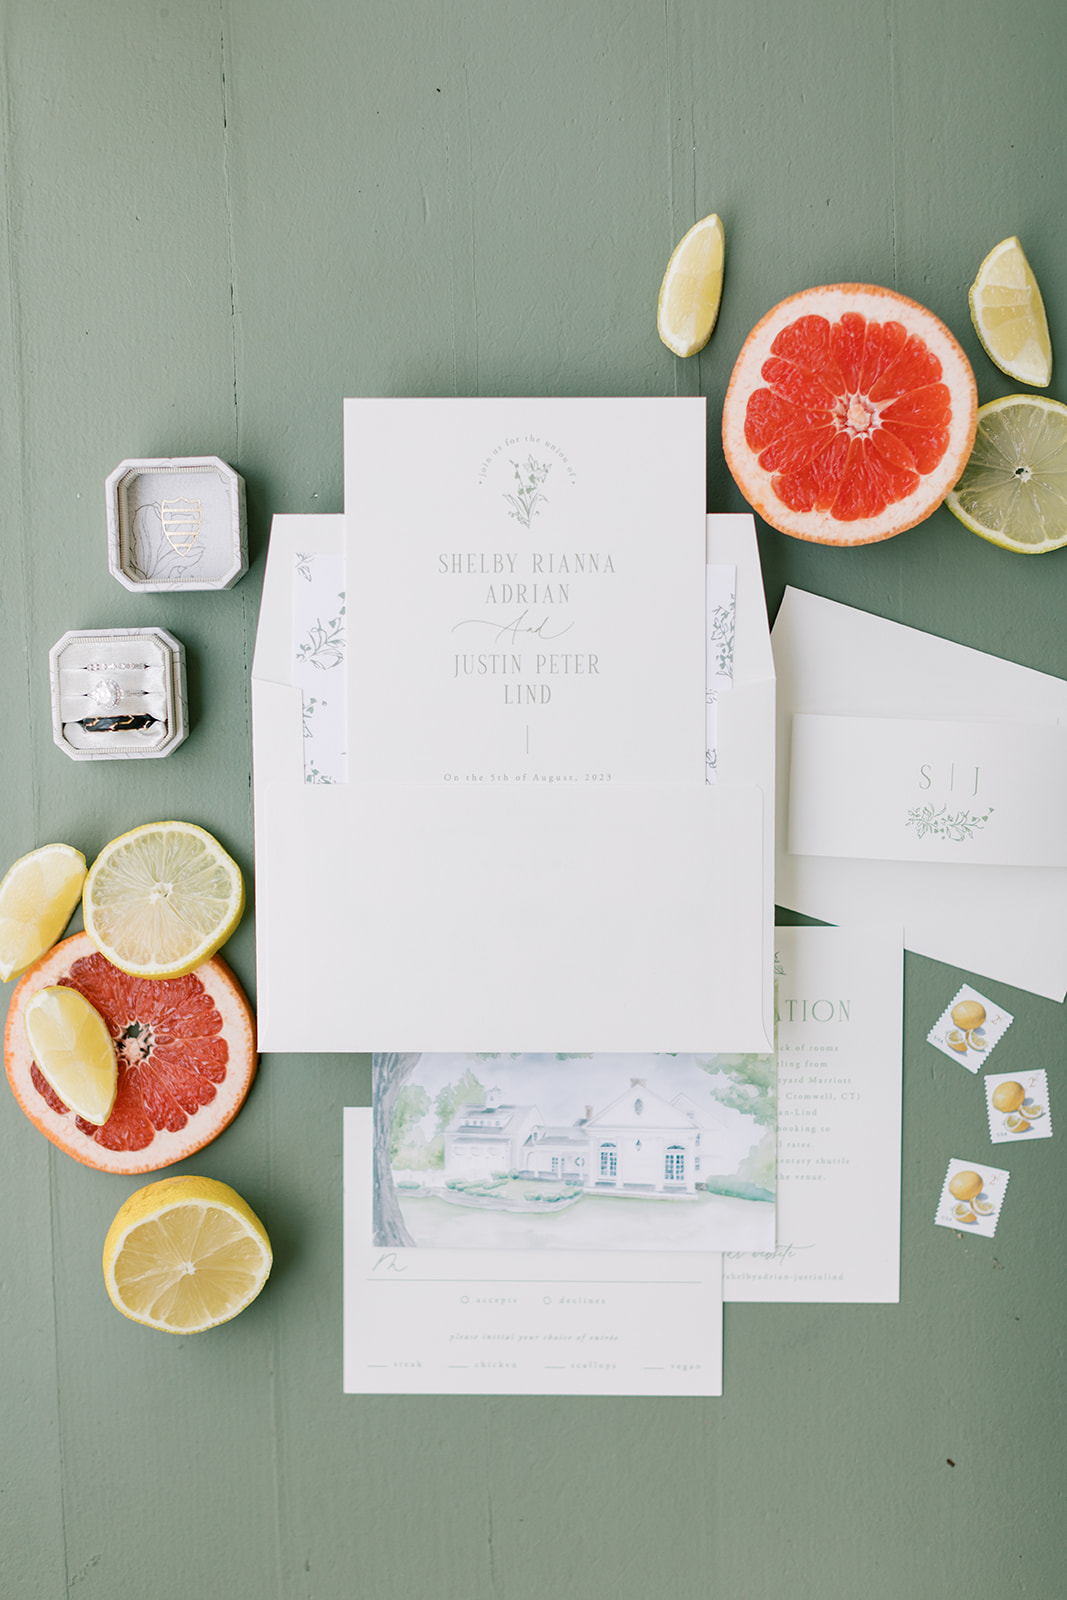 wedding invitation styled with green background and citrus